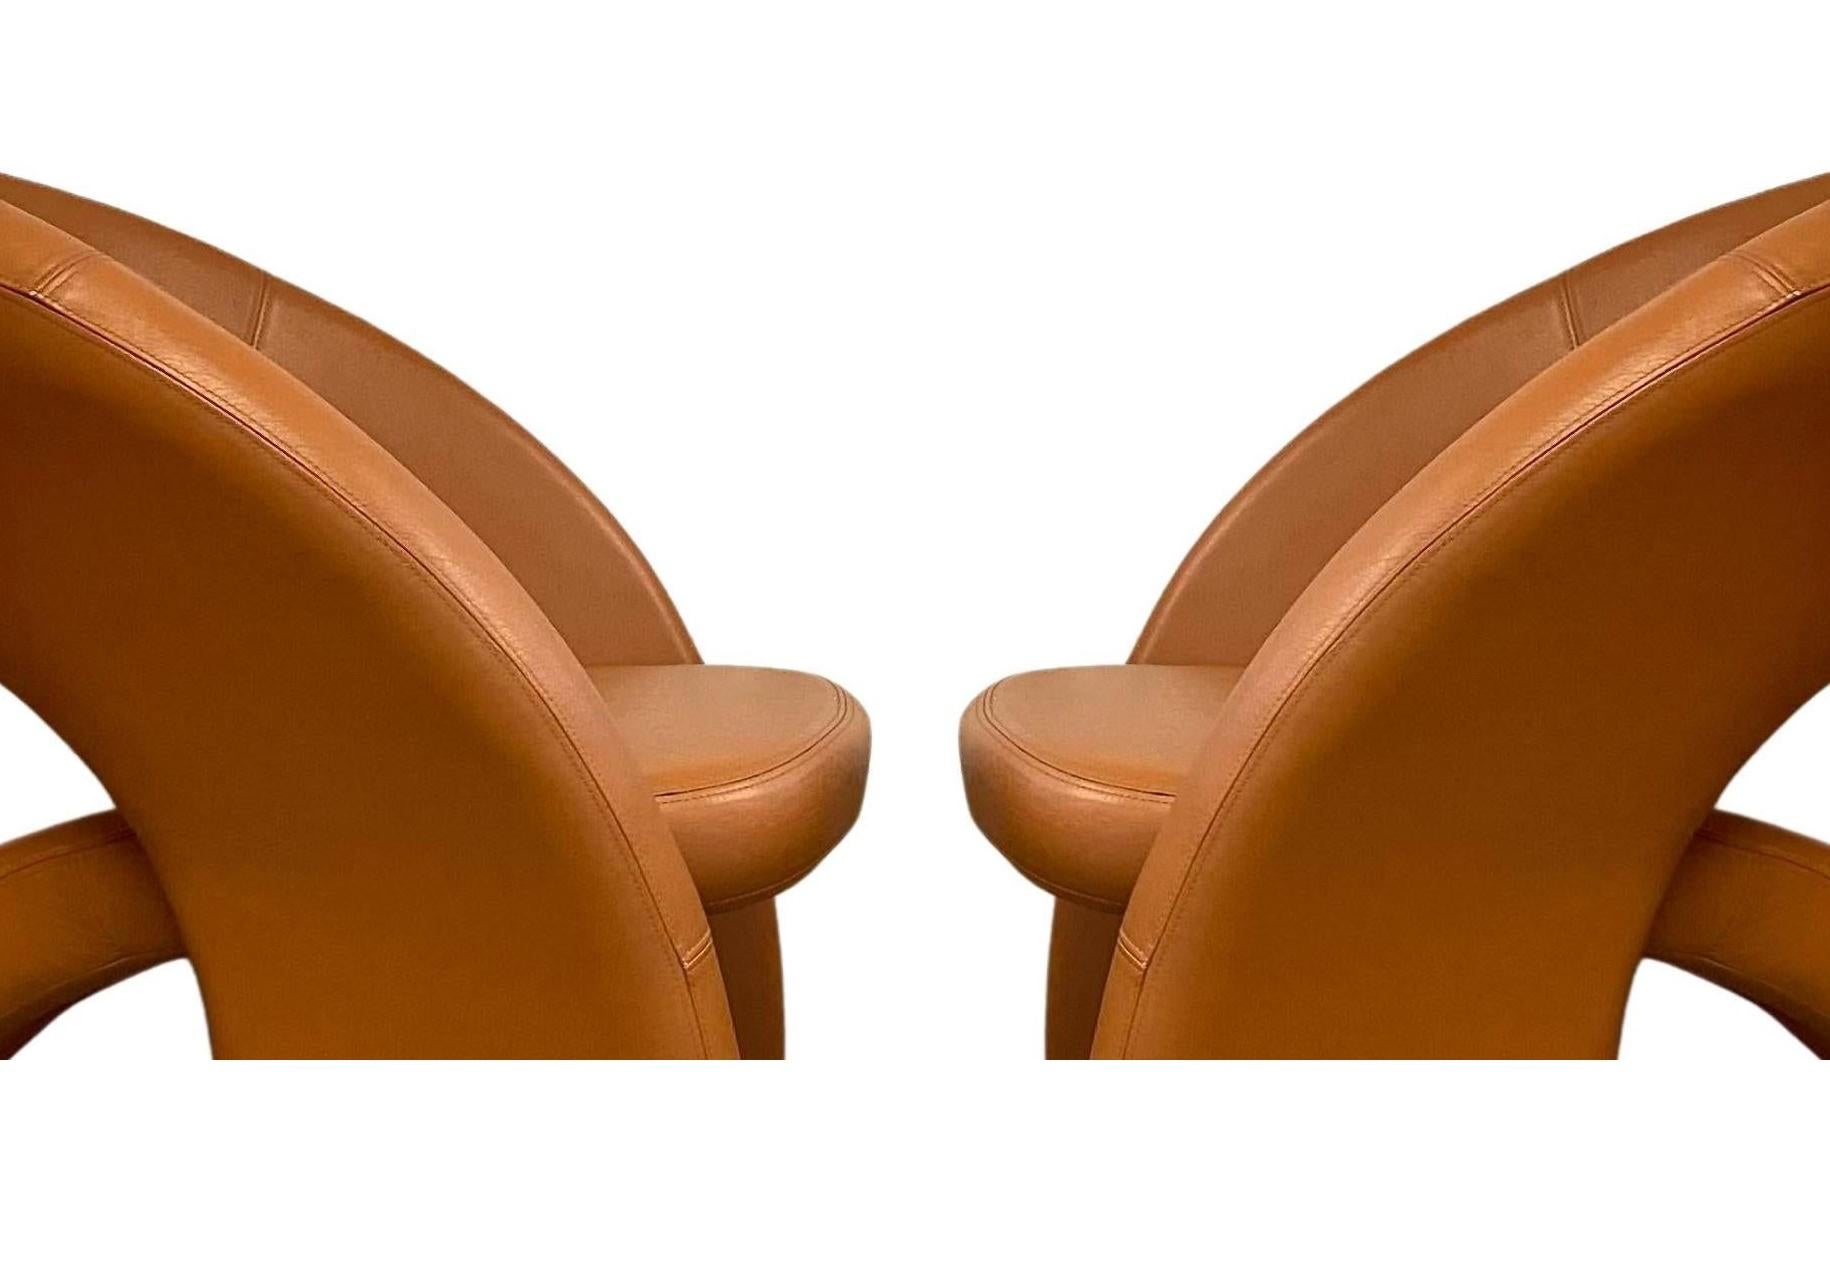 Stunning post modern Jaymar chairs for those who seek the extraordinary. Sculptural and confident, these remarkable chairs are functional modern art. It features a dynamic design with three leg construction, sweeping curves forming organic contours